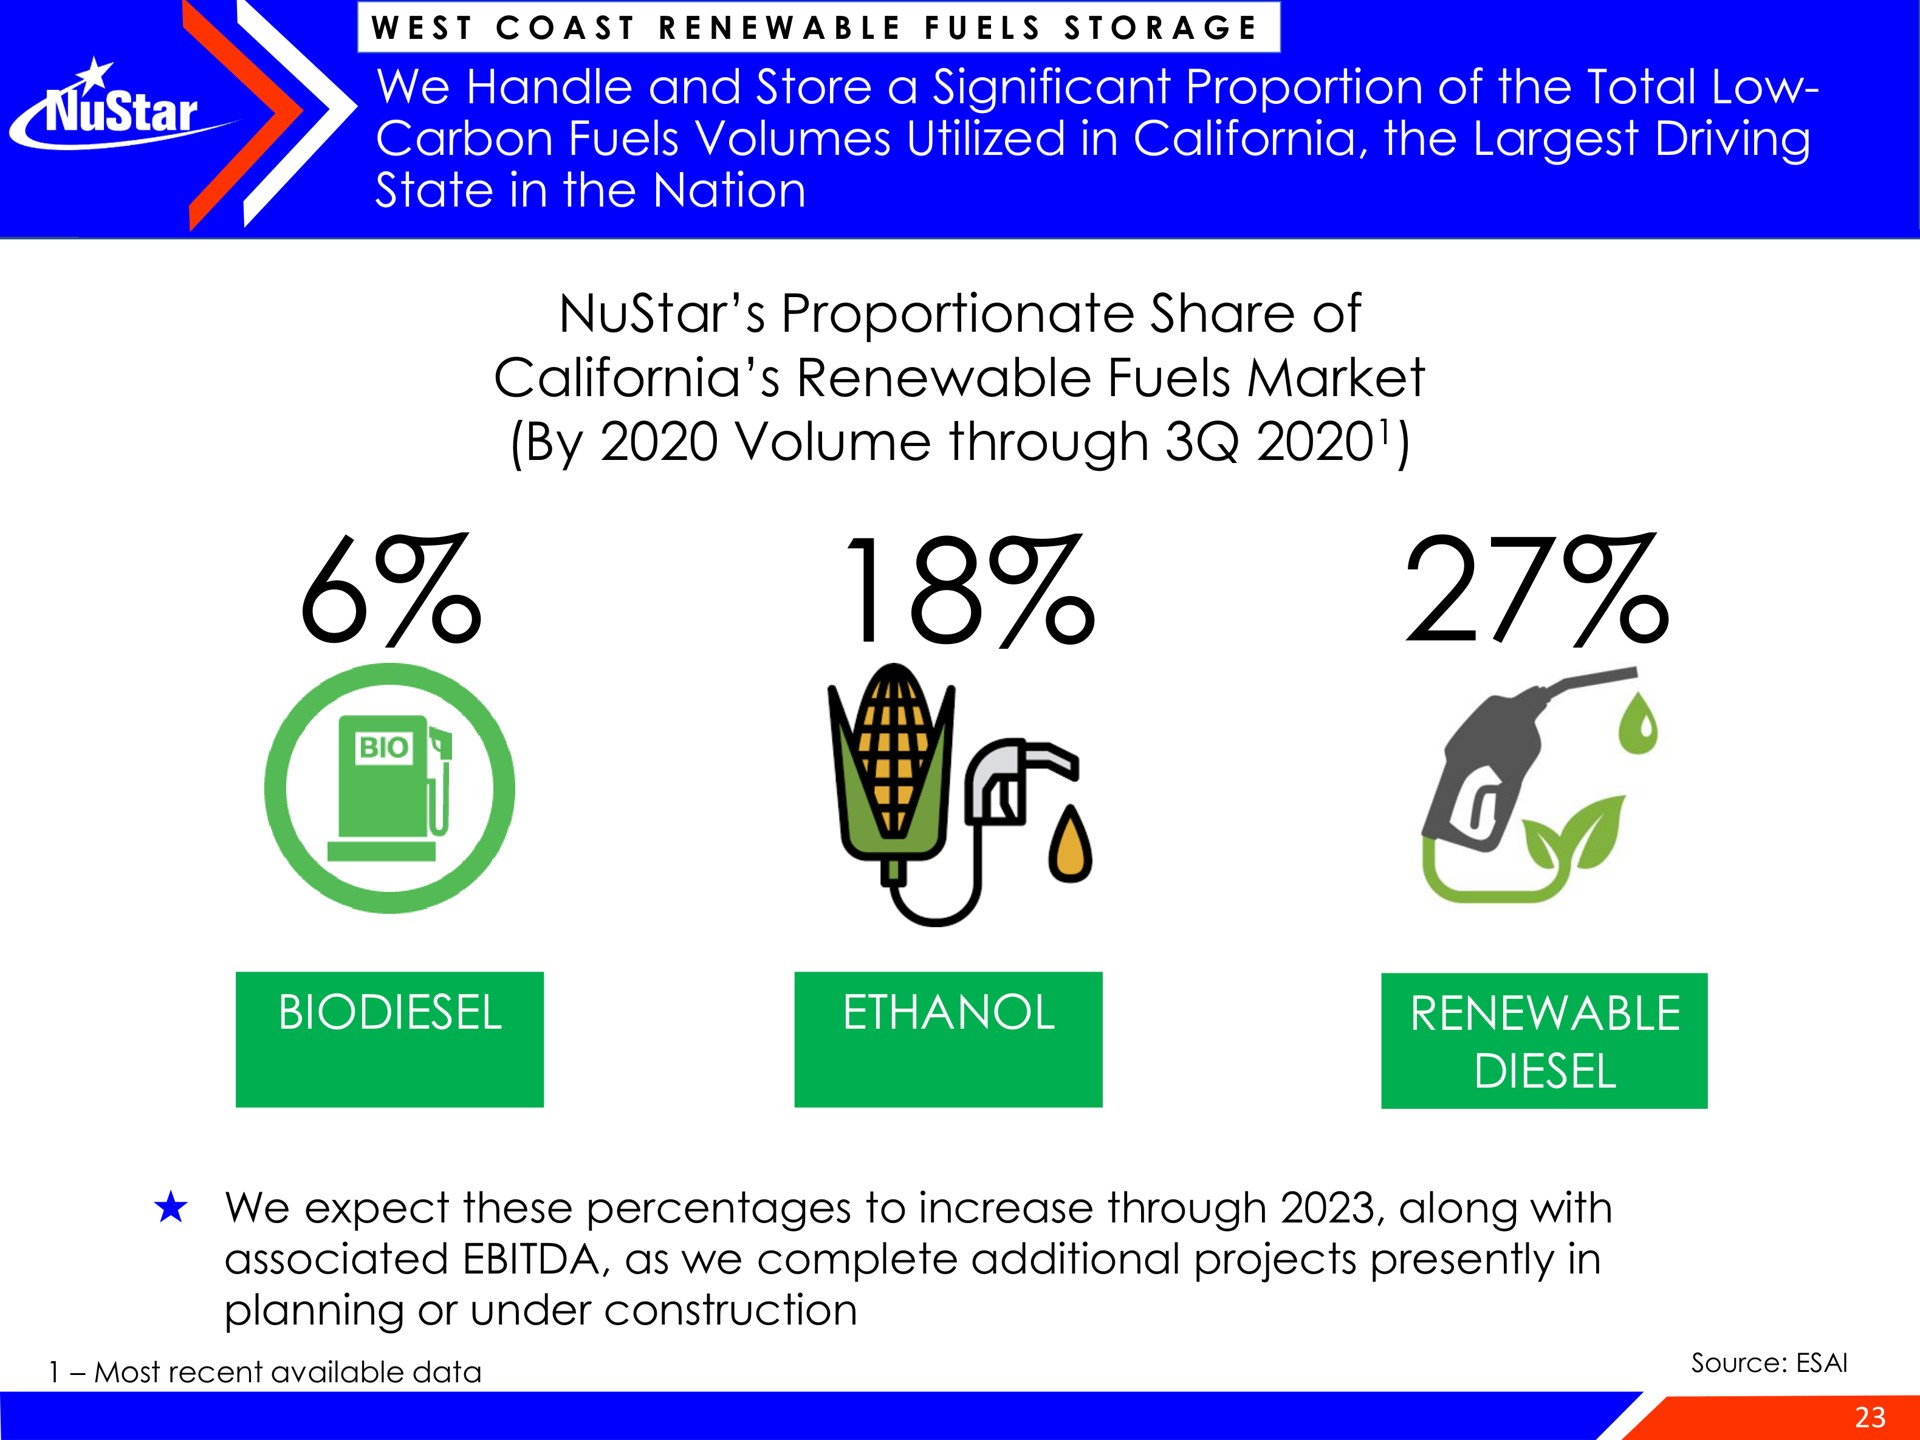 we handle and store a significant proportion of the total low carbon fuels volumes utilized in the driving state in the nation proportionate share of renewable fuels market by volume through ethanol renewable diesel | NuStar Energy